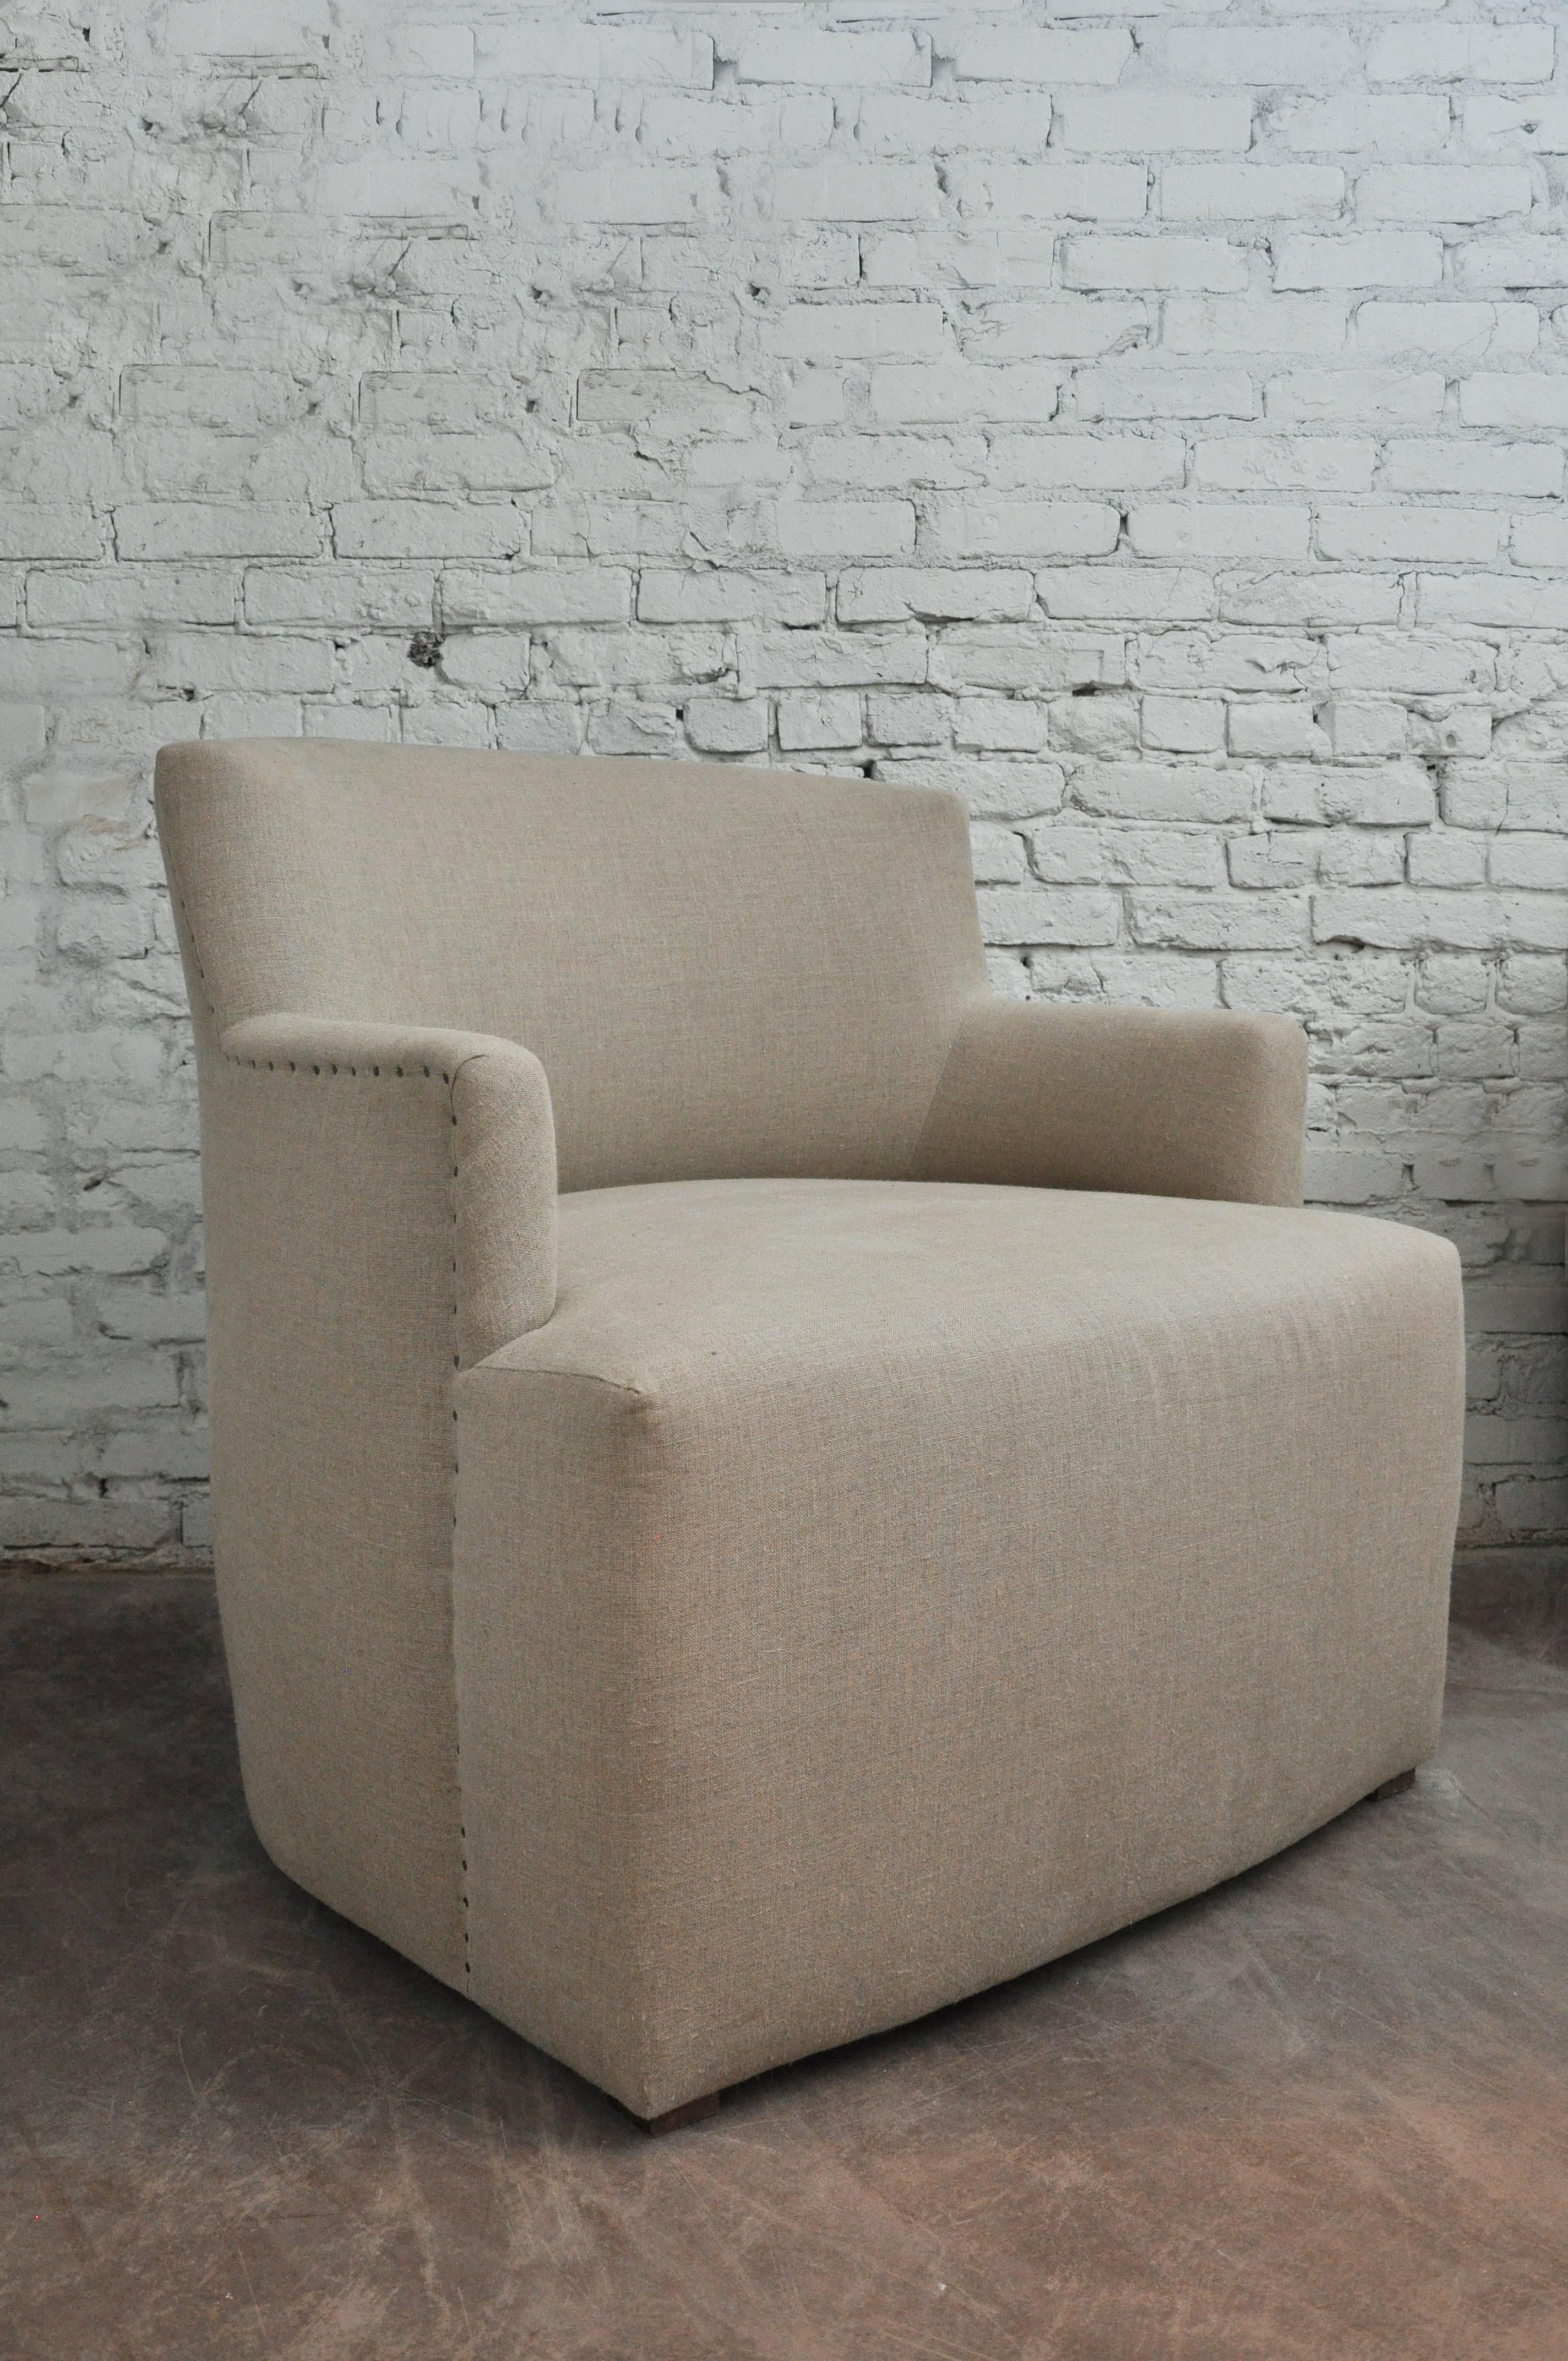 Mid-20th century Italian club chair, circa 1950s. Oversized, modern design. 
Vintage but newly upholstered in flax colored Italian linen with nailhead detail. 
this chair is cool and unusual and very comfortable  

Dimensions: 35" H x